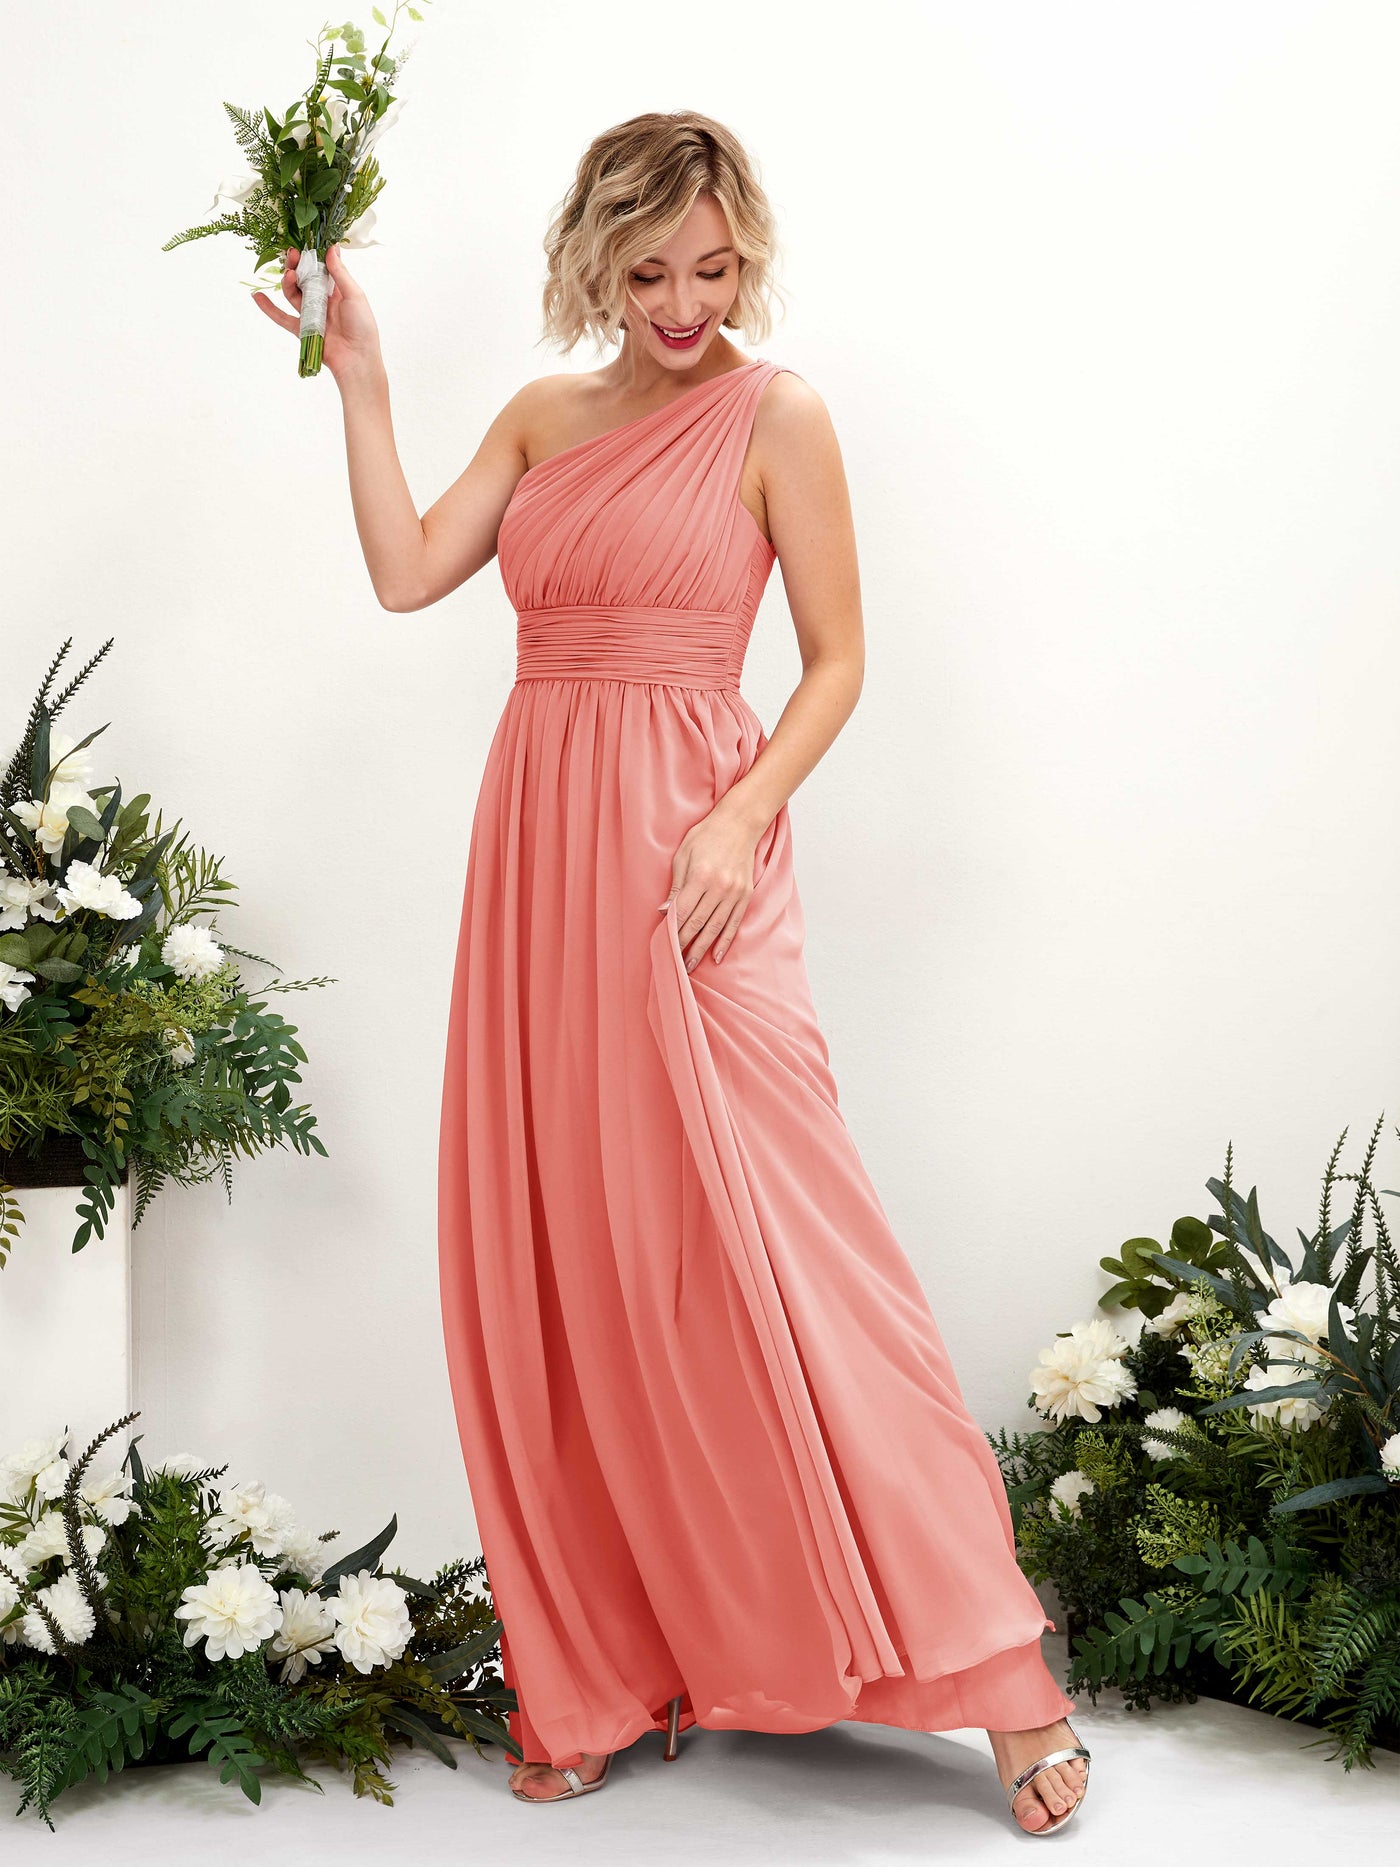 Peach Pink Bridesmaid Dresses Bridesmaid Dress Ball Gown Chiffon One Shoulder Full Length Sleeveless Wedding Party Dress (81225029)#color_peach-pink